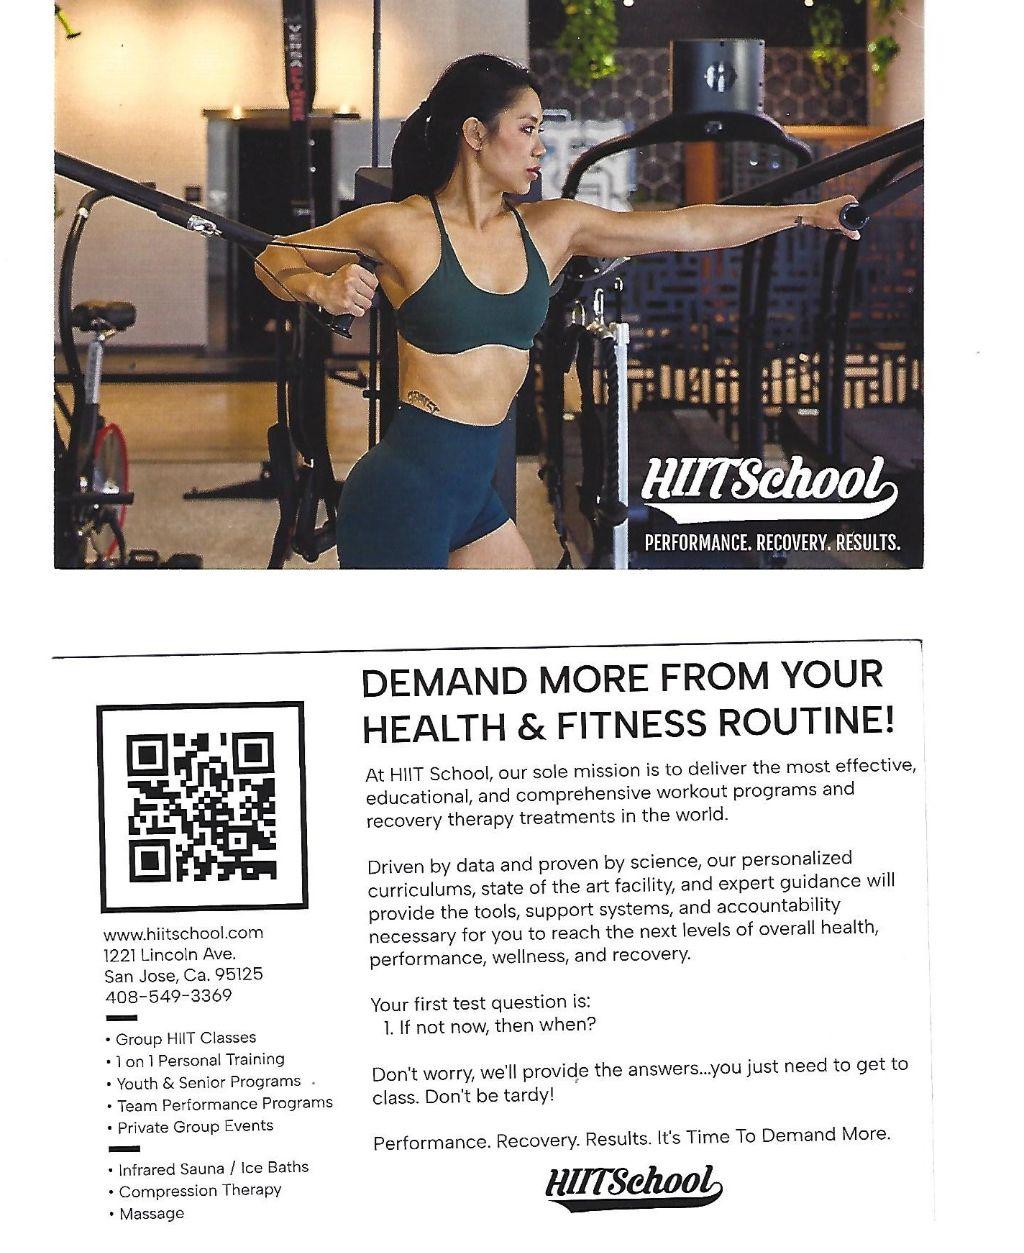 HIIT School - one month membership and basket of swag with Starbucks cups